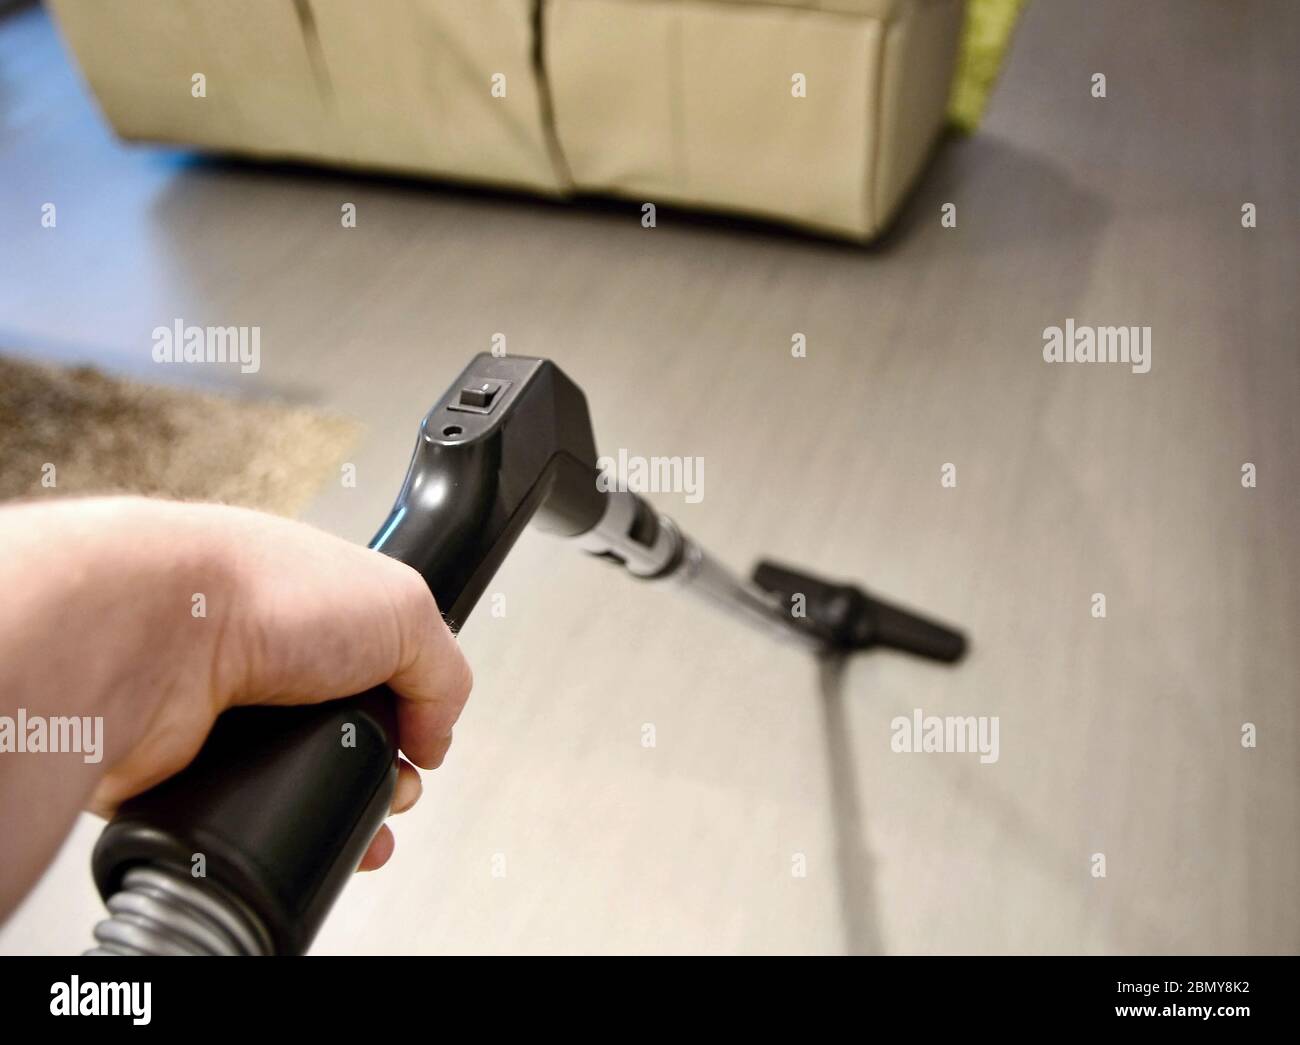 Man hand holding vacuum cleaner tube and makes housework and vacuuming the floor in room. Closeup point of view or first person view shot. Stock Photo